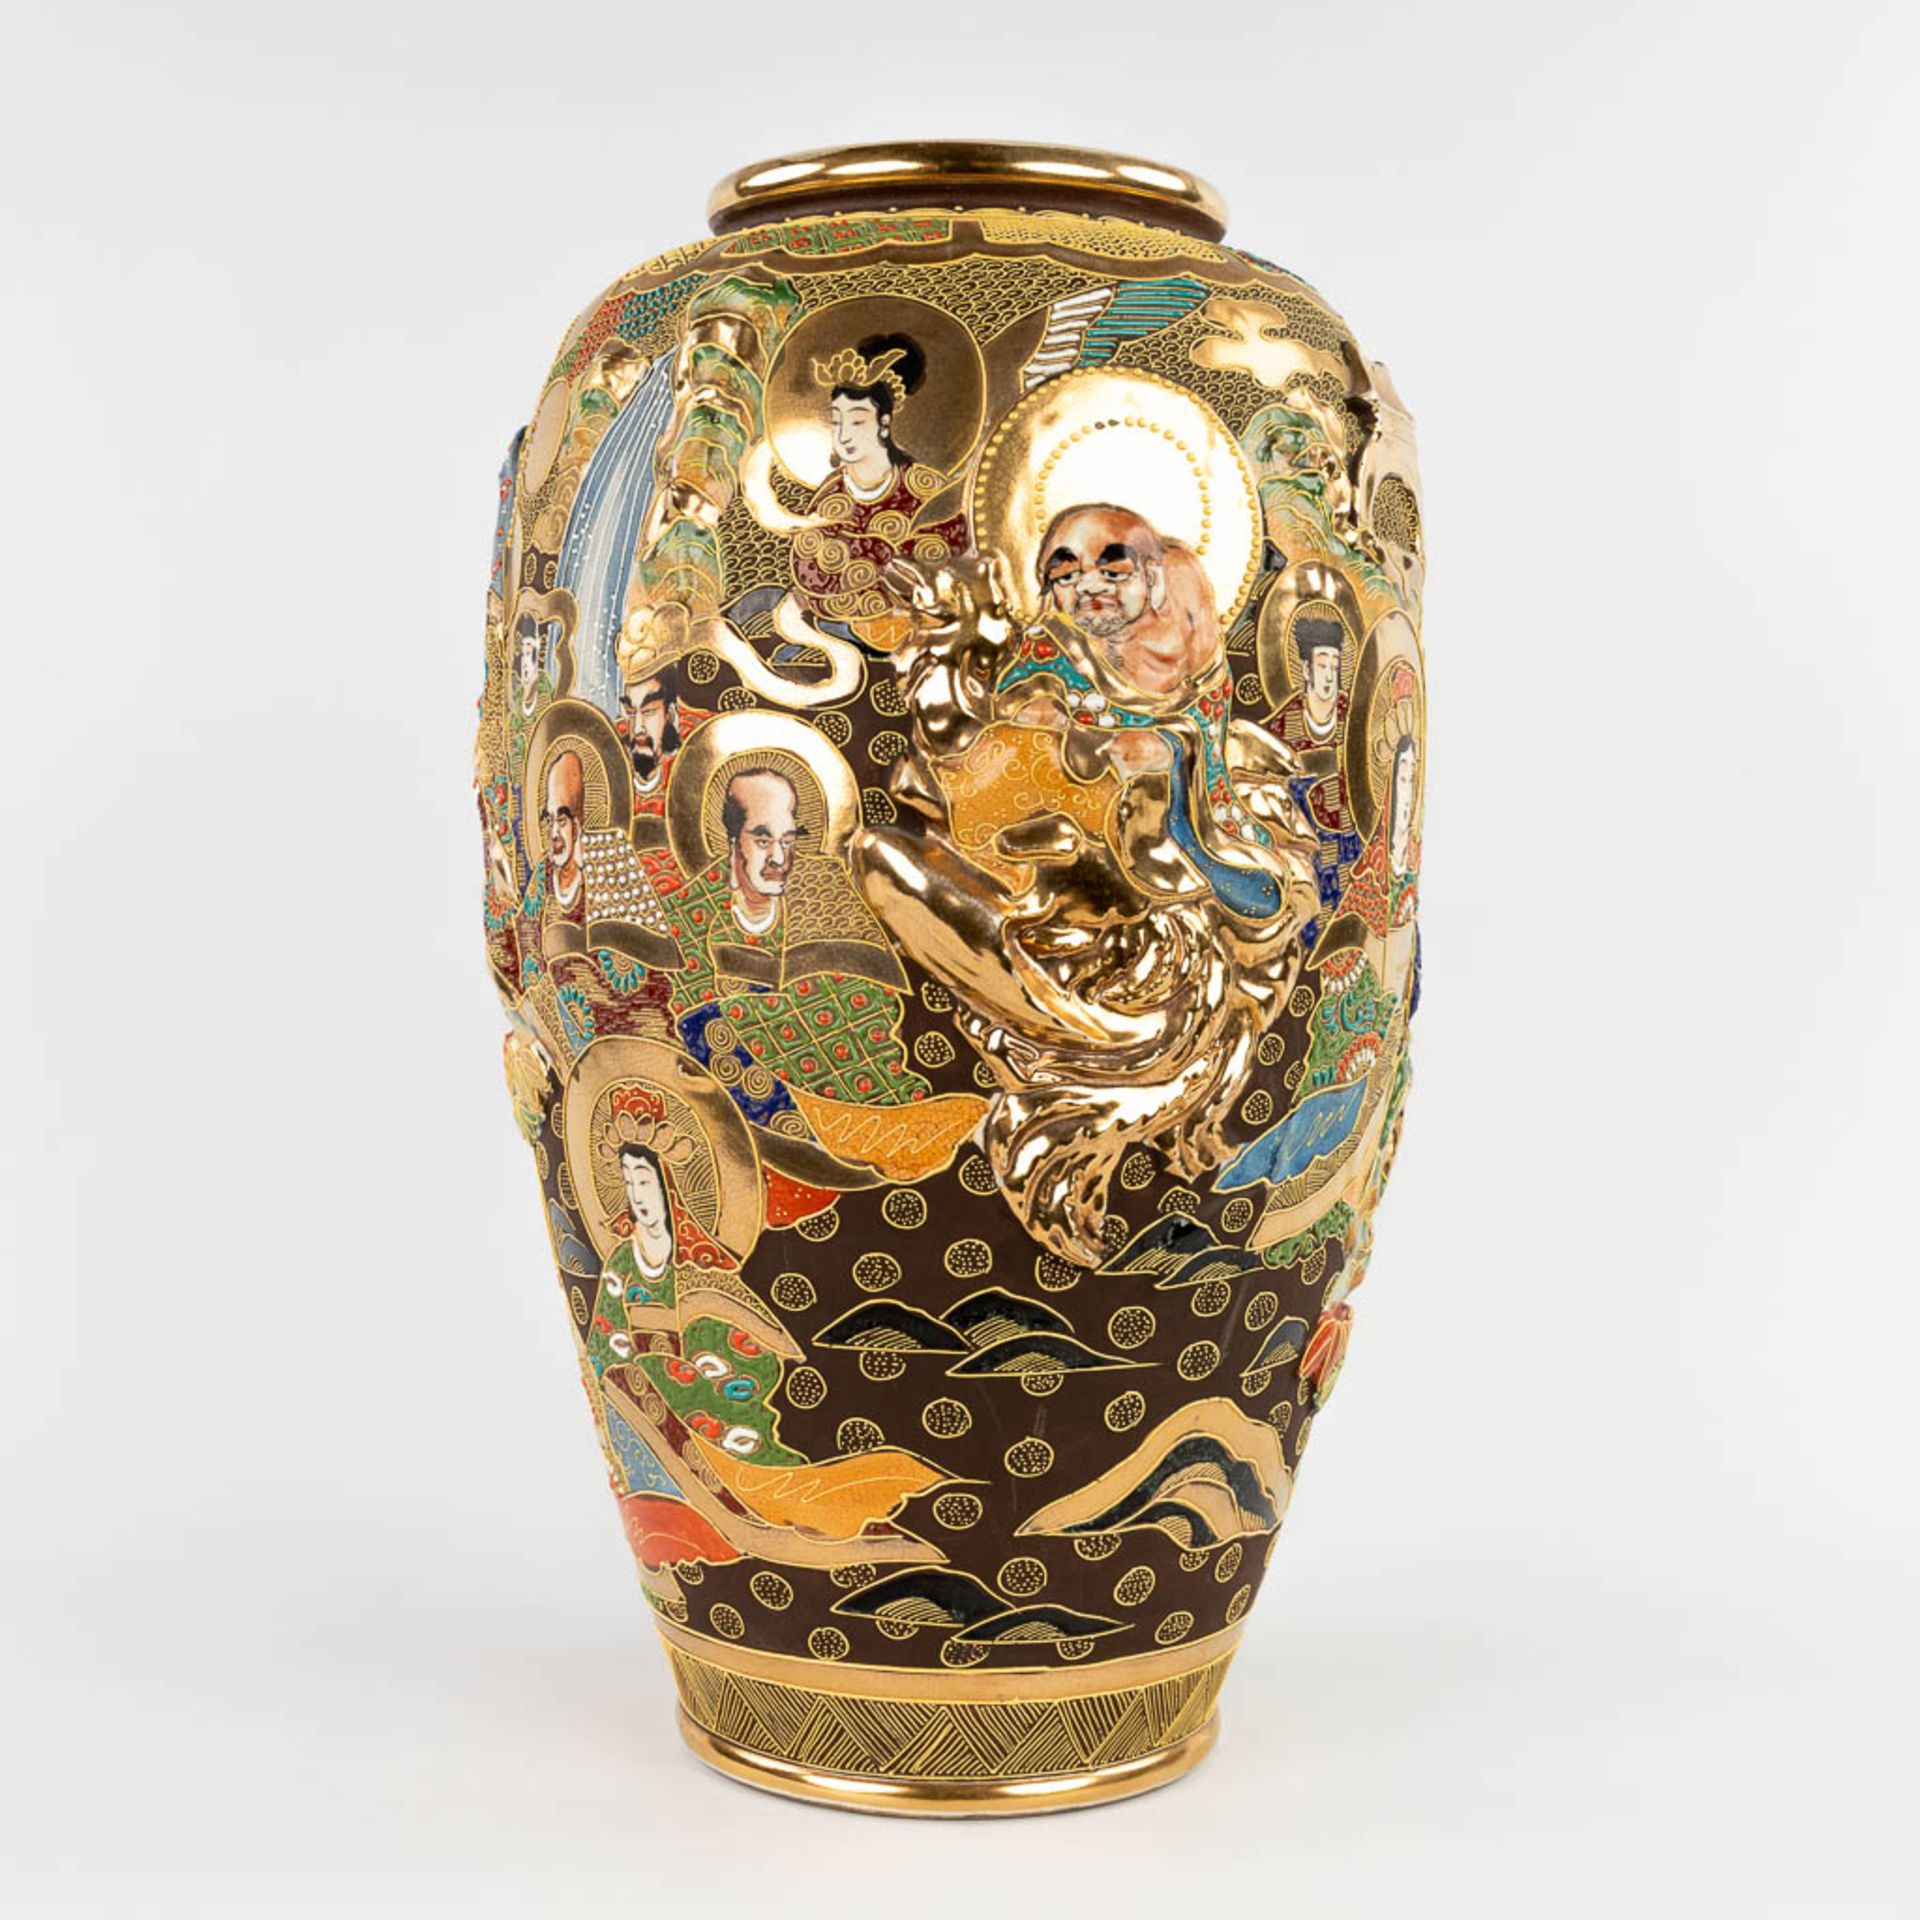 A large vase, Satsuma faience decorated with men and ladies, Japan. 20th C. (H:48 x D:28 cm) - Image 6 of 17